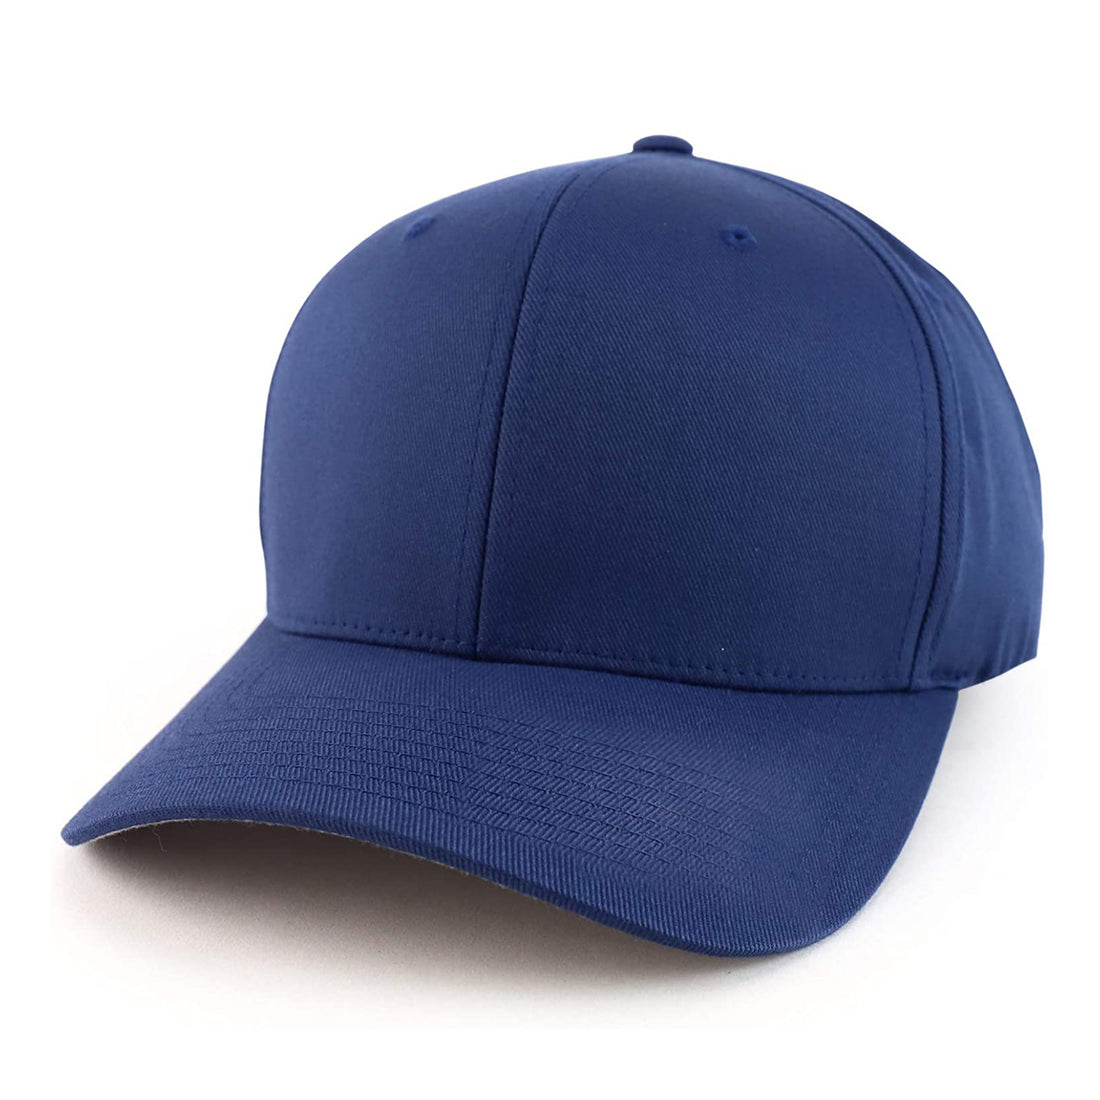 Trendy Apparel Shop Plain 6 Panel Structured Stretch Fitted Closure Baseball Cap